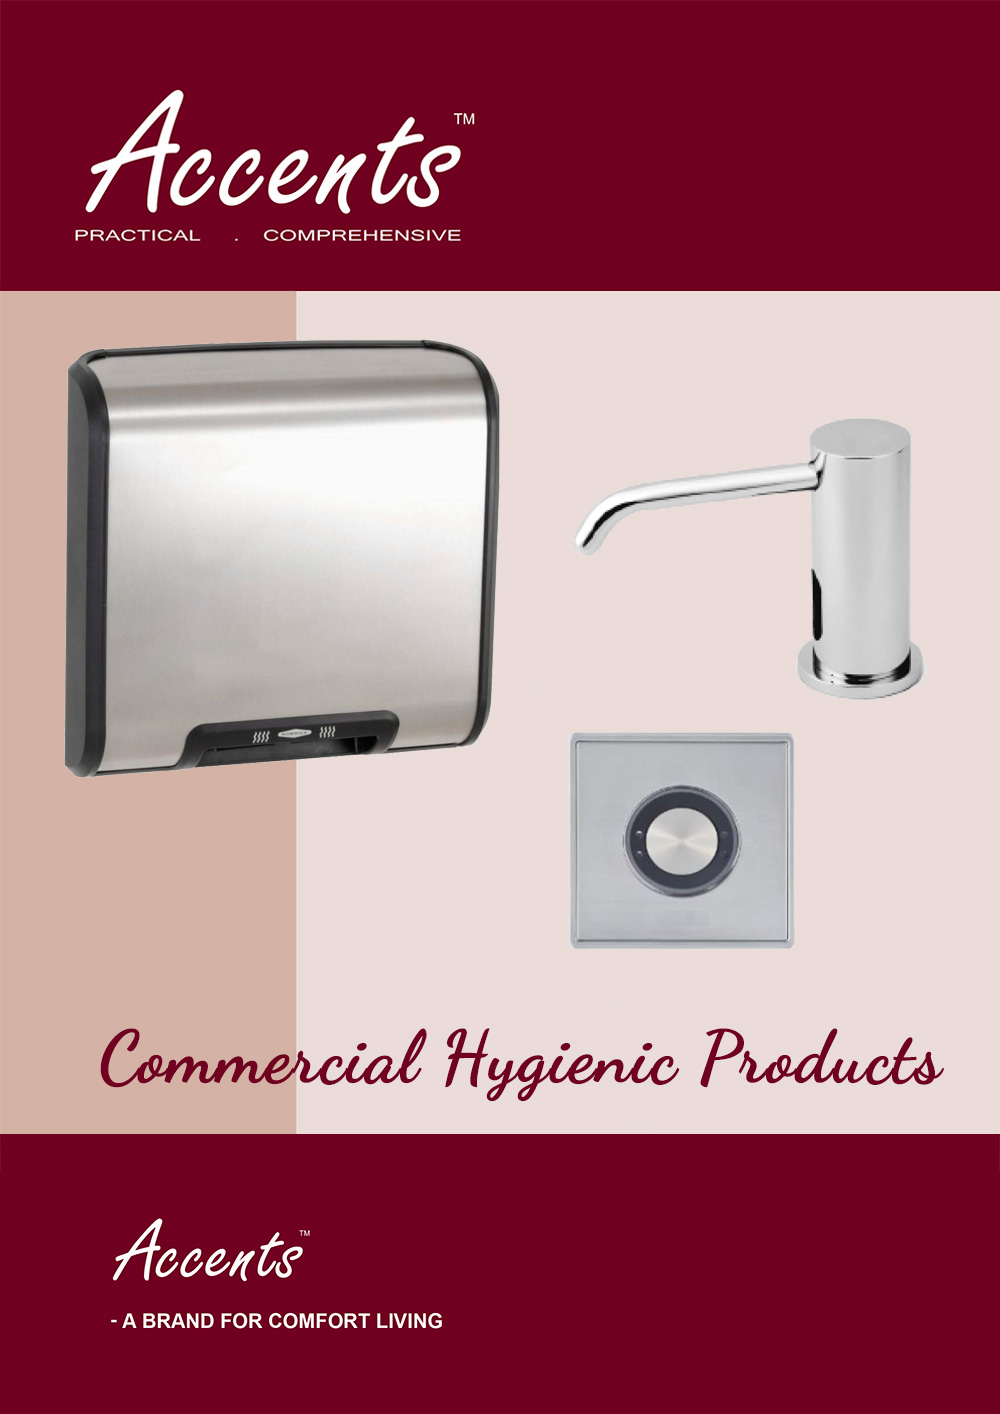 Catalogue-Cover_Accents-Commercial-Hygienic